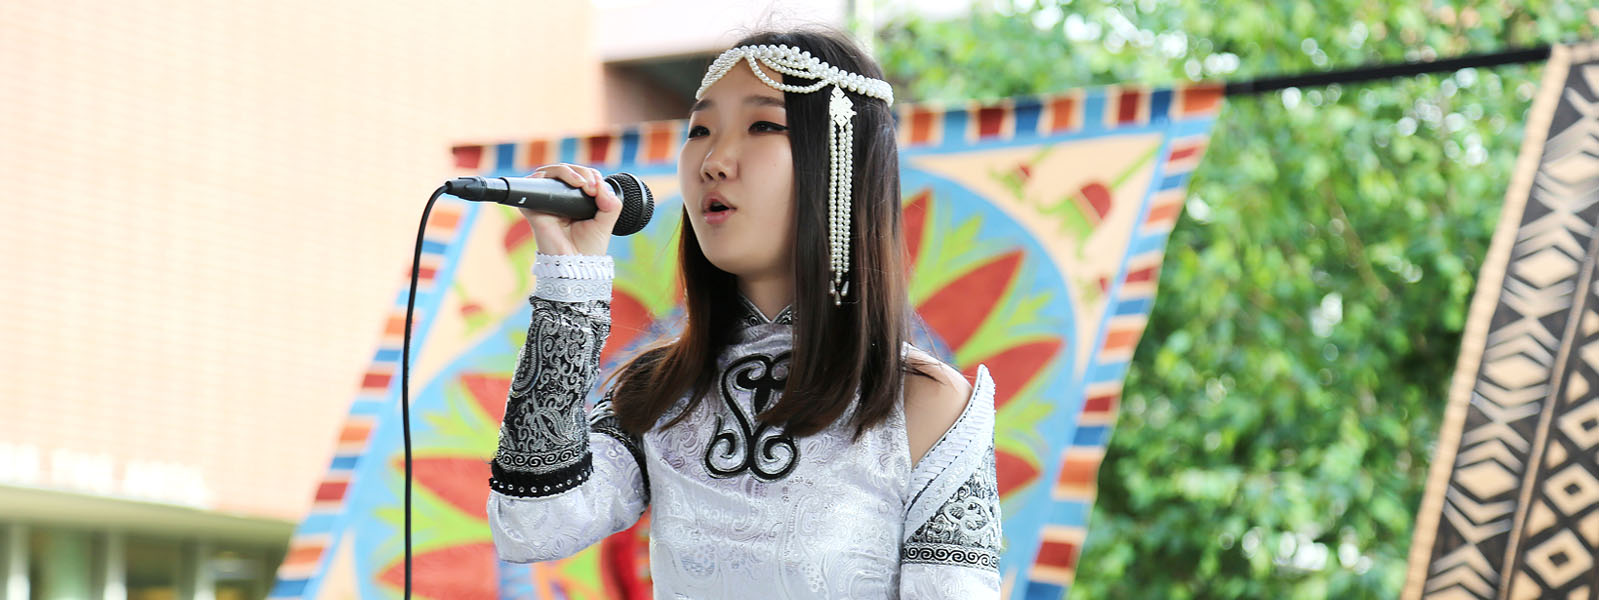 Asian female wearing decorative/celebratory white dress and headband, standing and singing with a microphone